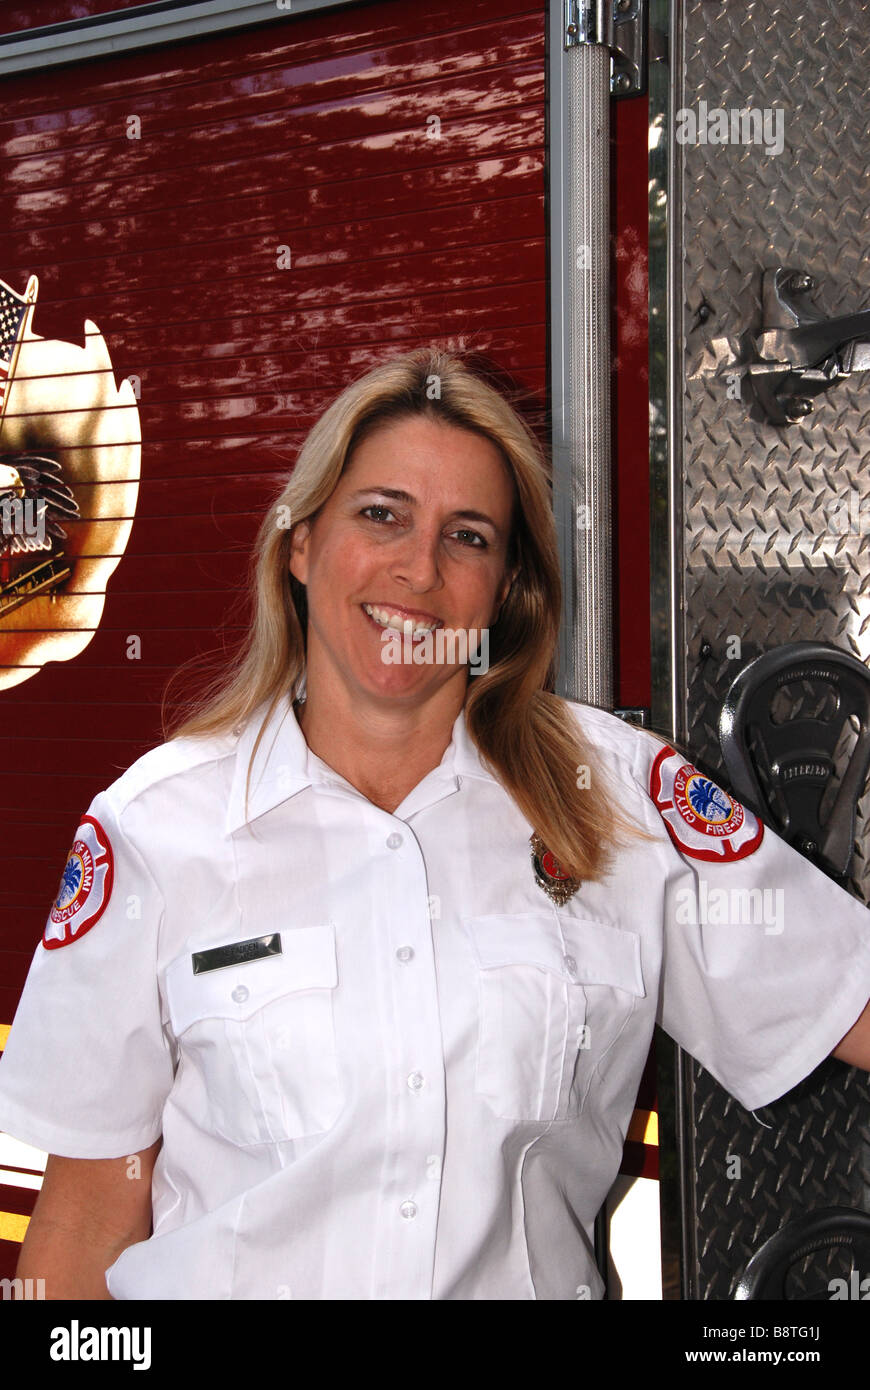 Smiling Female firefighter paramedic in dress uniform posing in front of fire engine Stock Photo